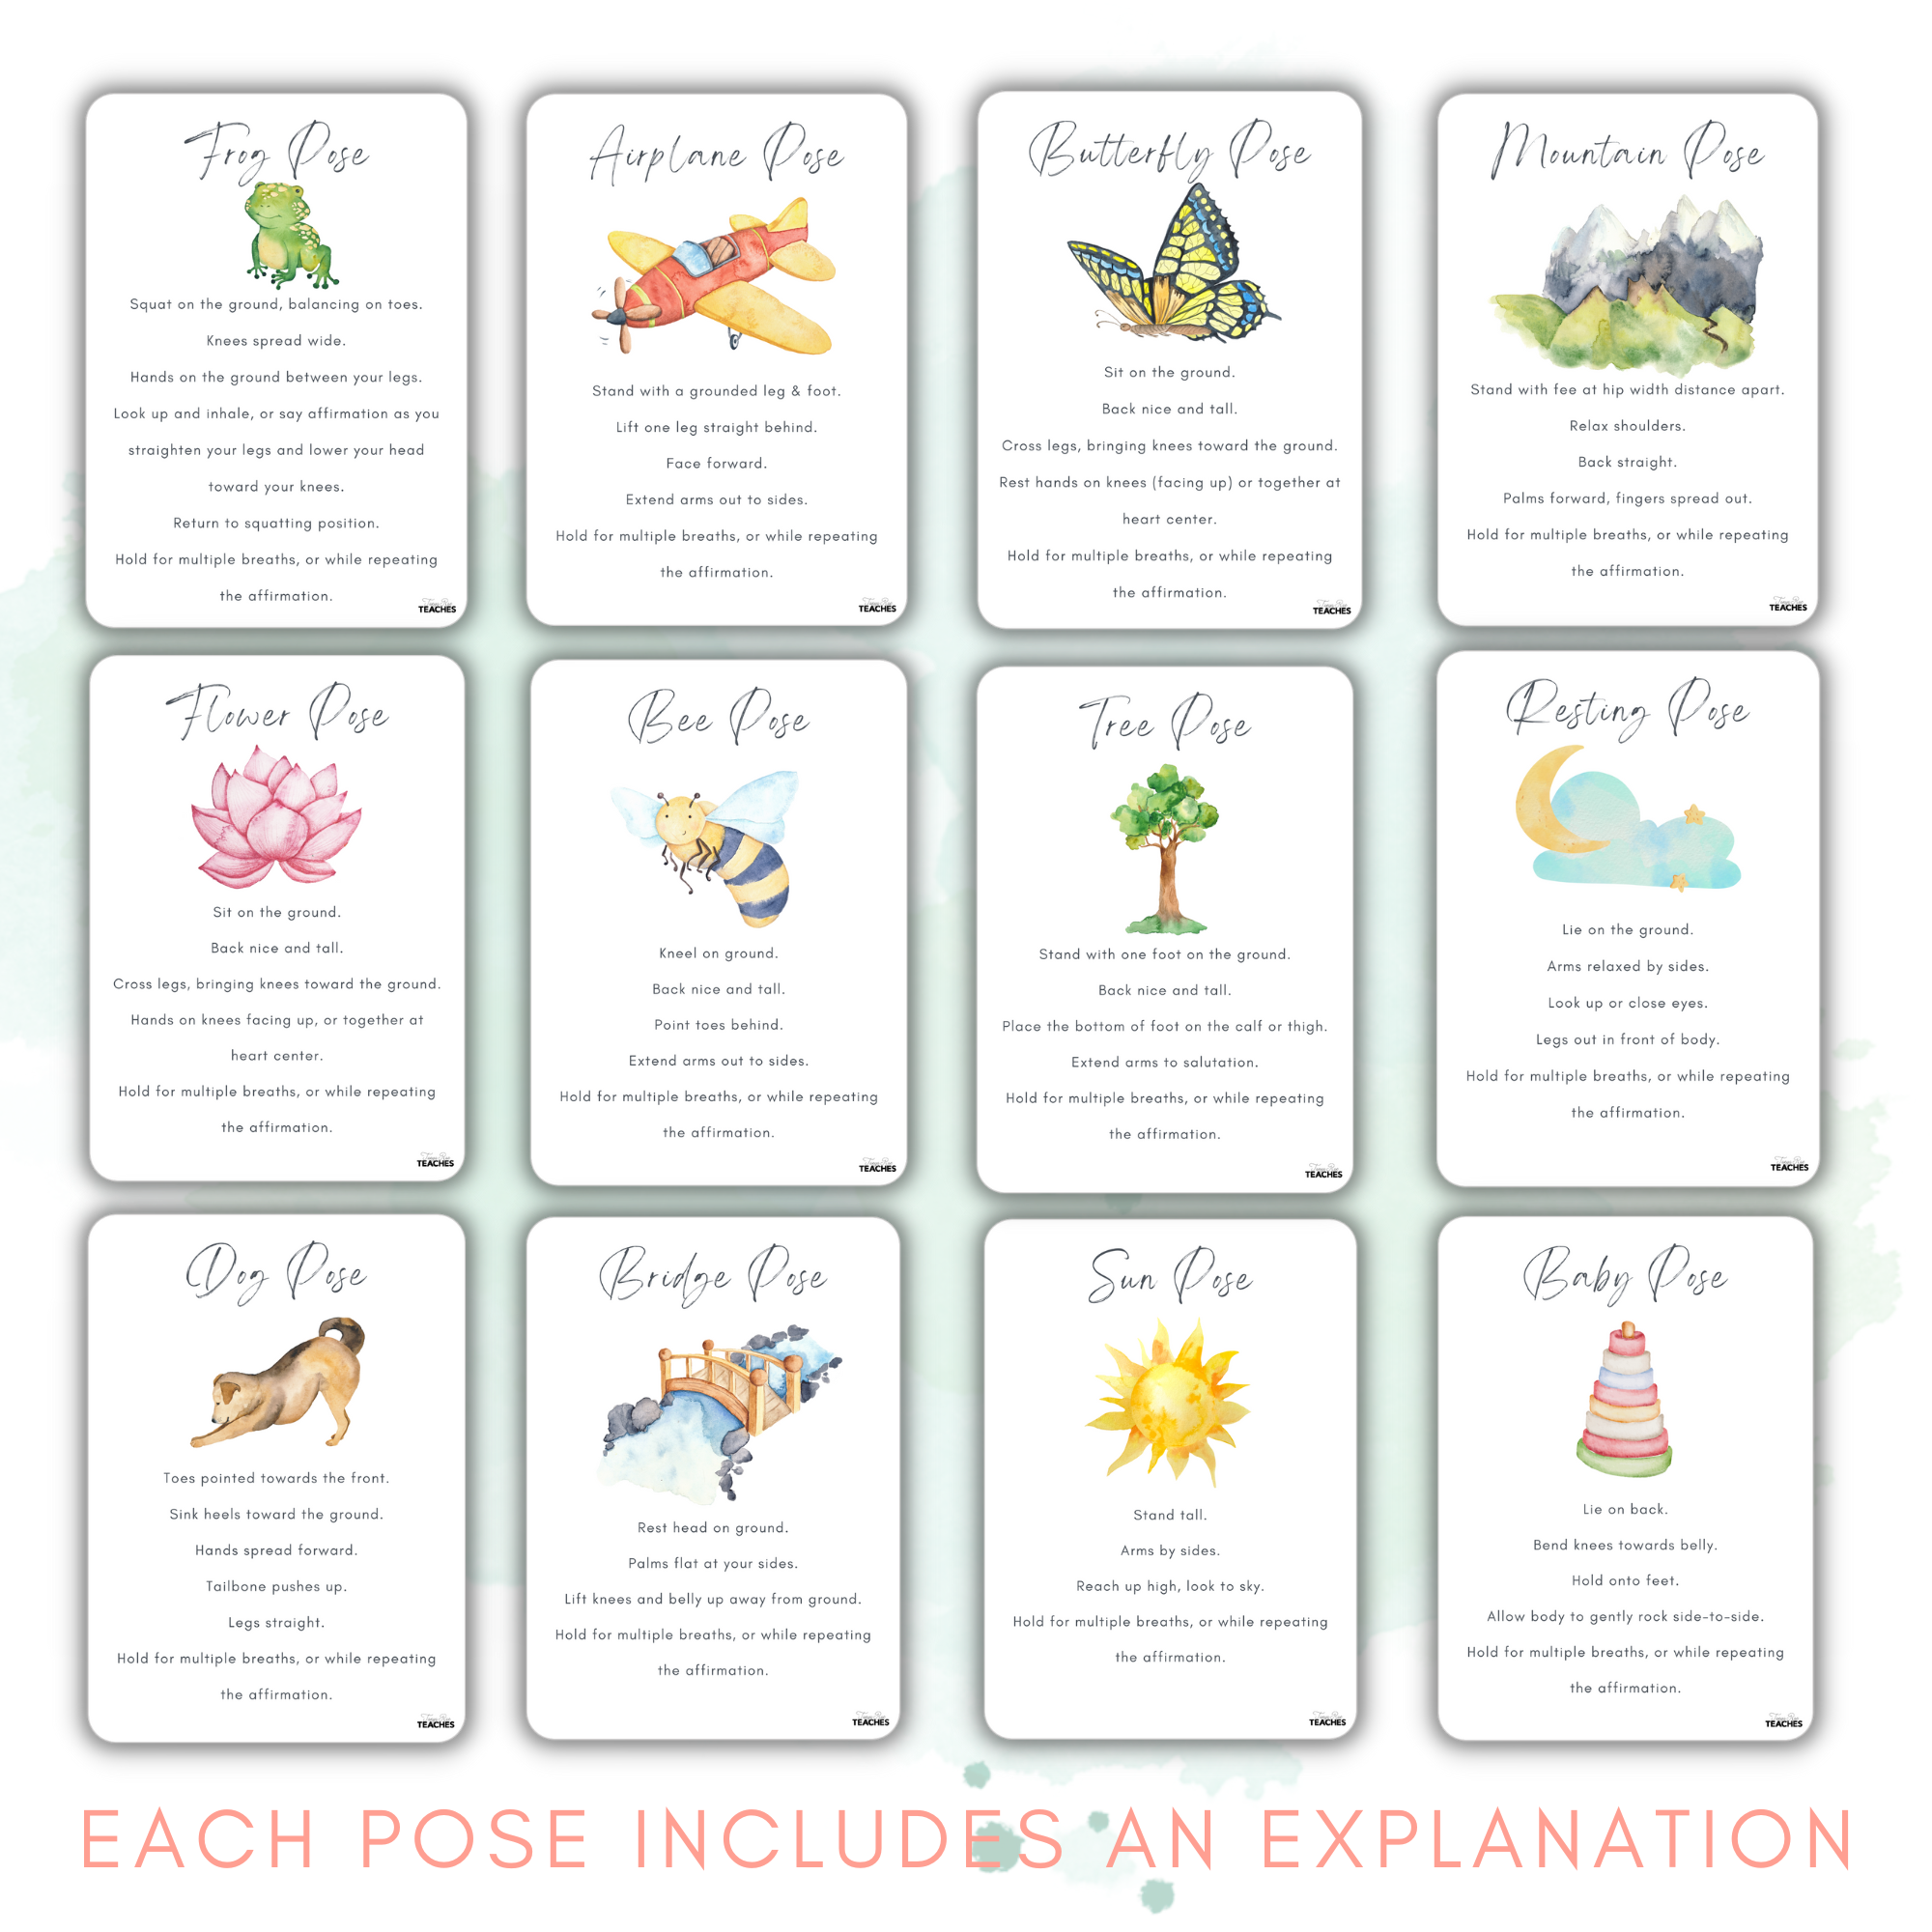 Kids Printable Yoga Cards with Affirmations